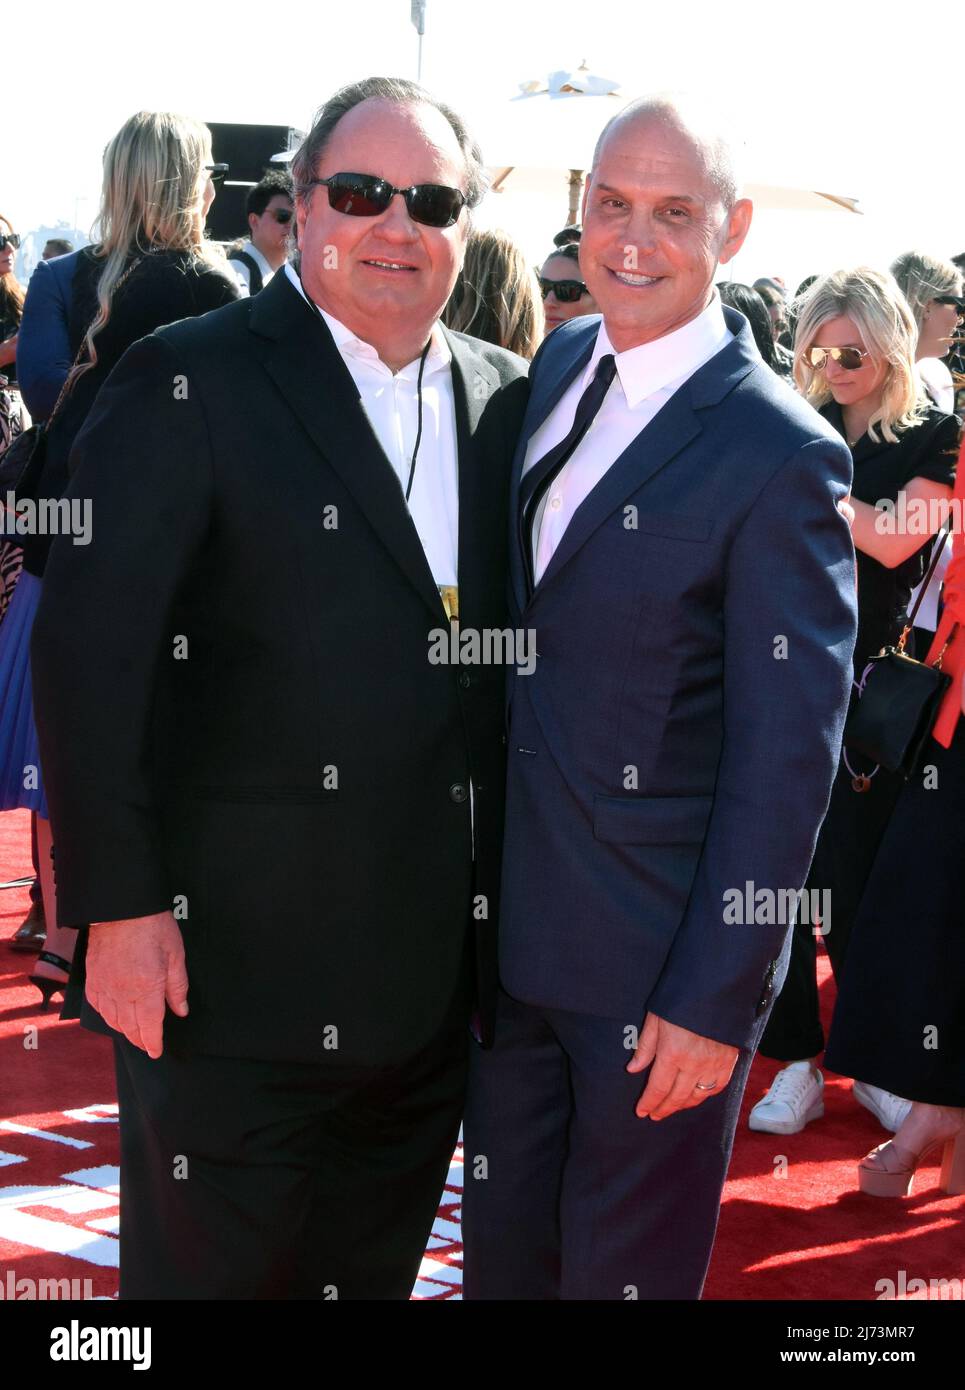 San Diego, California, USA 4th May 2022 President and CEO Paramount Global Bob Bakish and Presdient and CEO Paramount Pictures Brian Robbins attend The Global Premiere of Top Gun: Maverick at USS MIDWAY on May 4, 2022 in San Diego, California, USA. Photo by Barry King/Alamy Stock Photo Stock Photo